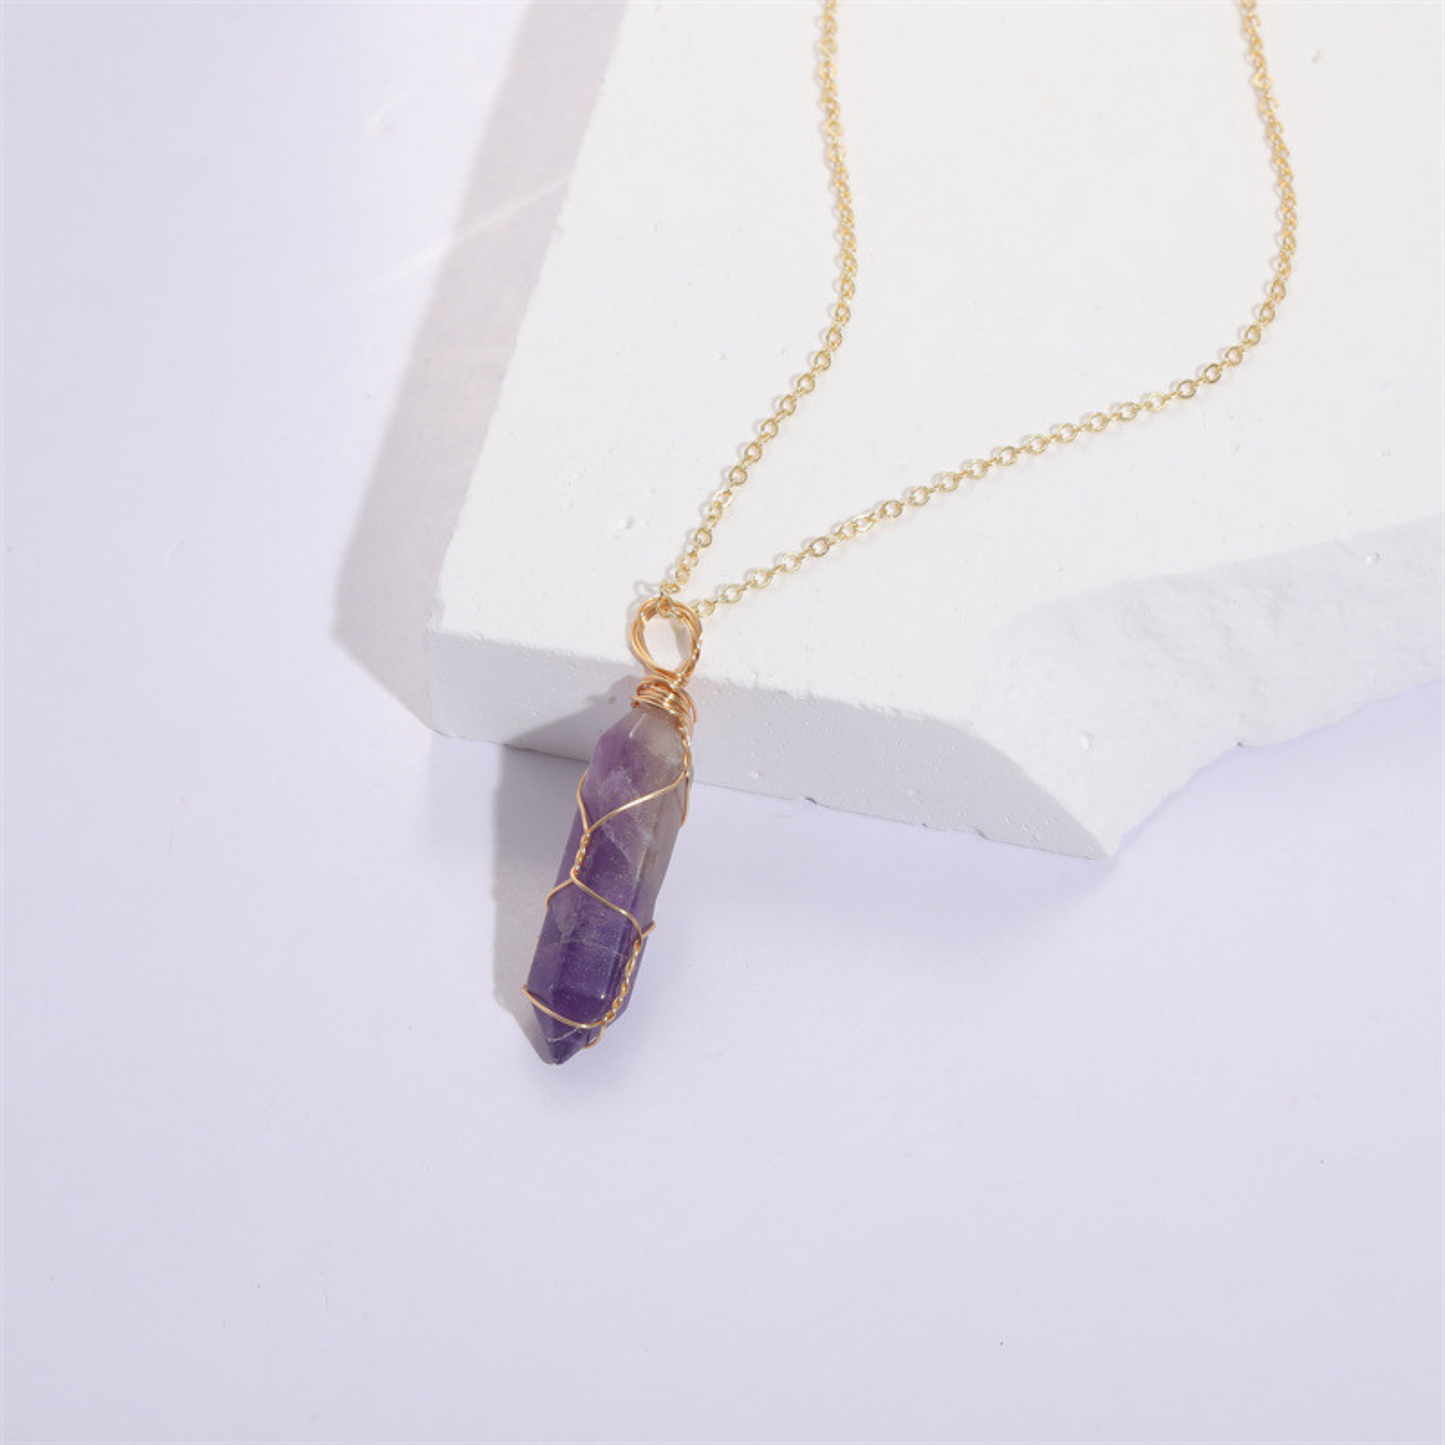 Minimalist Crystal Tower Pendant Necklace for Women